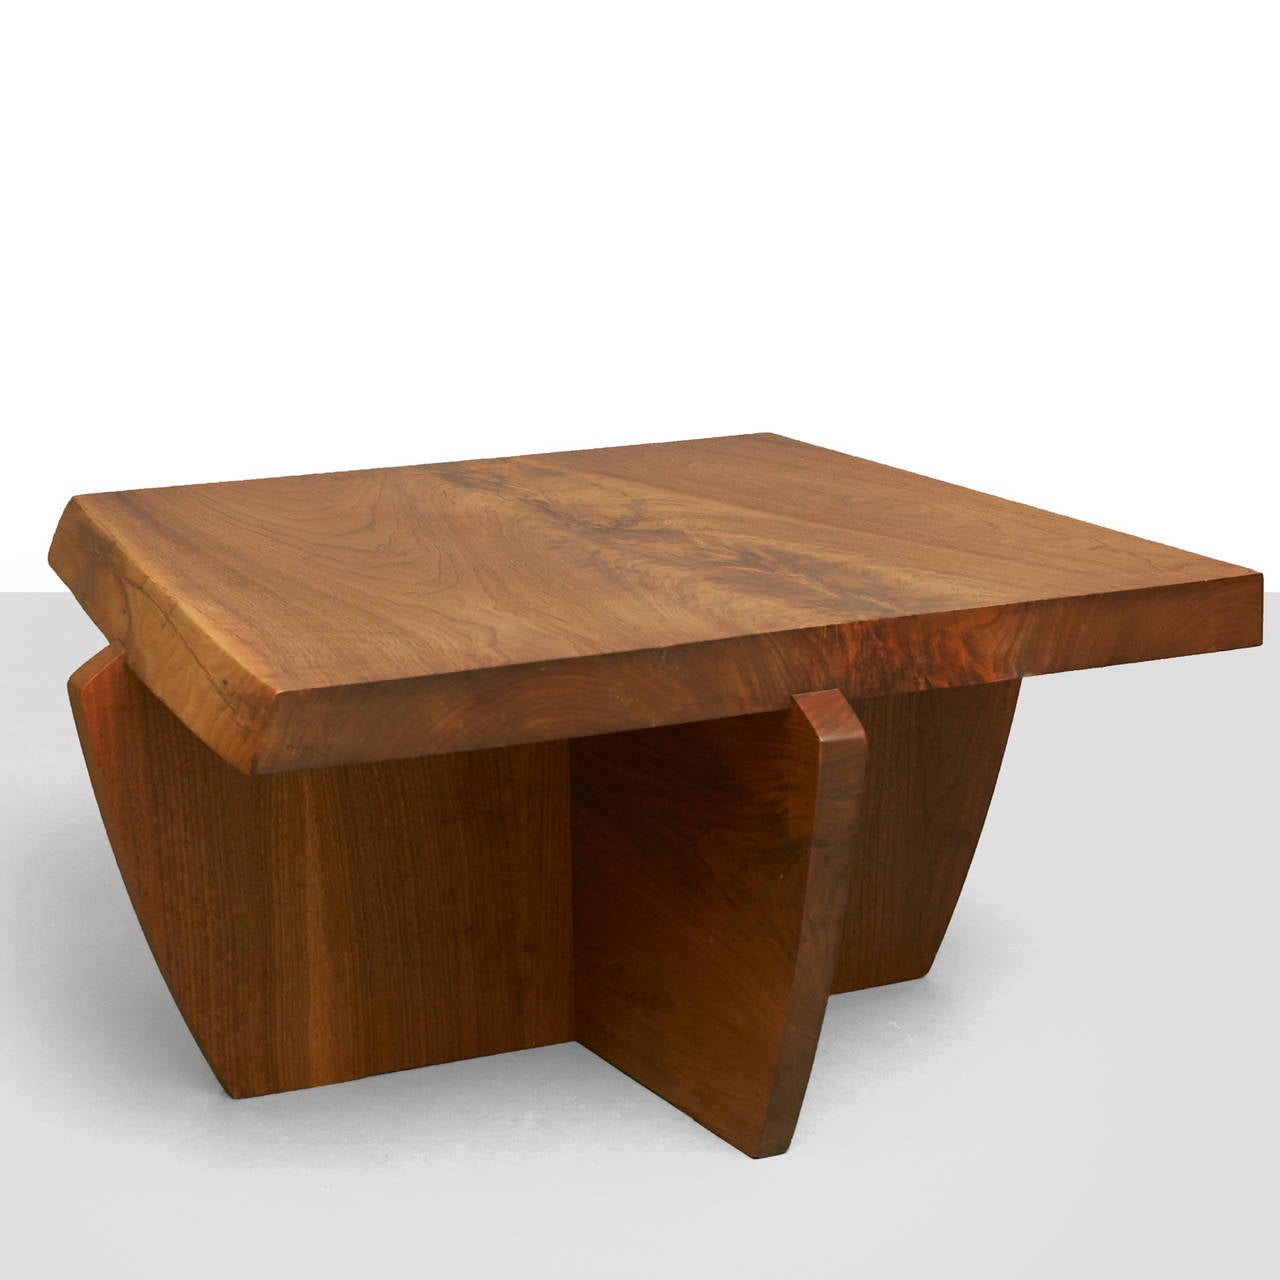 A “Gabellini” coffee table by George Nakashima from the Greenrock series, the table. Designed by George Nakashima - this version executed by his daughter Mira. Slab top and legs with free edge. Signed and dated to underside.